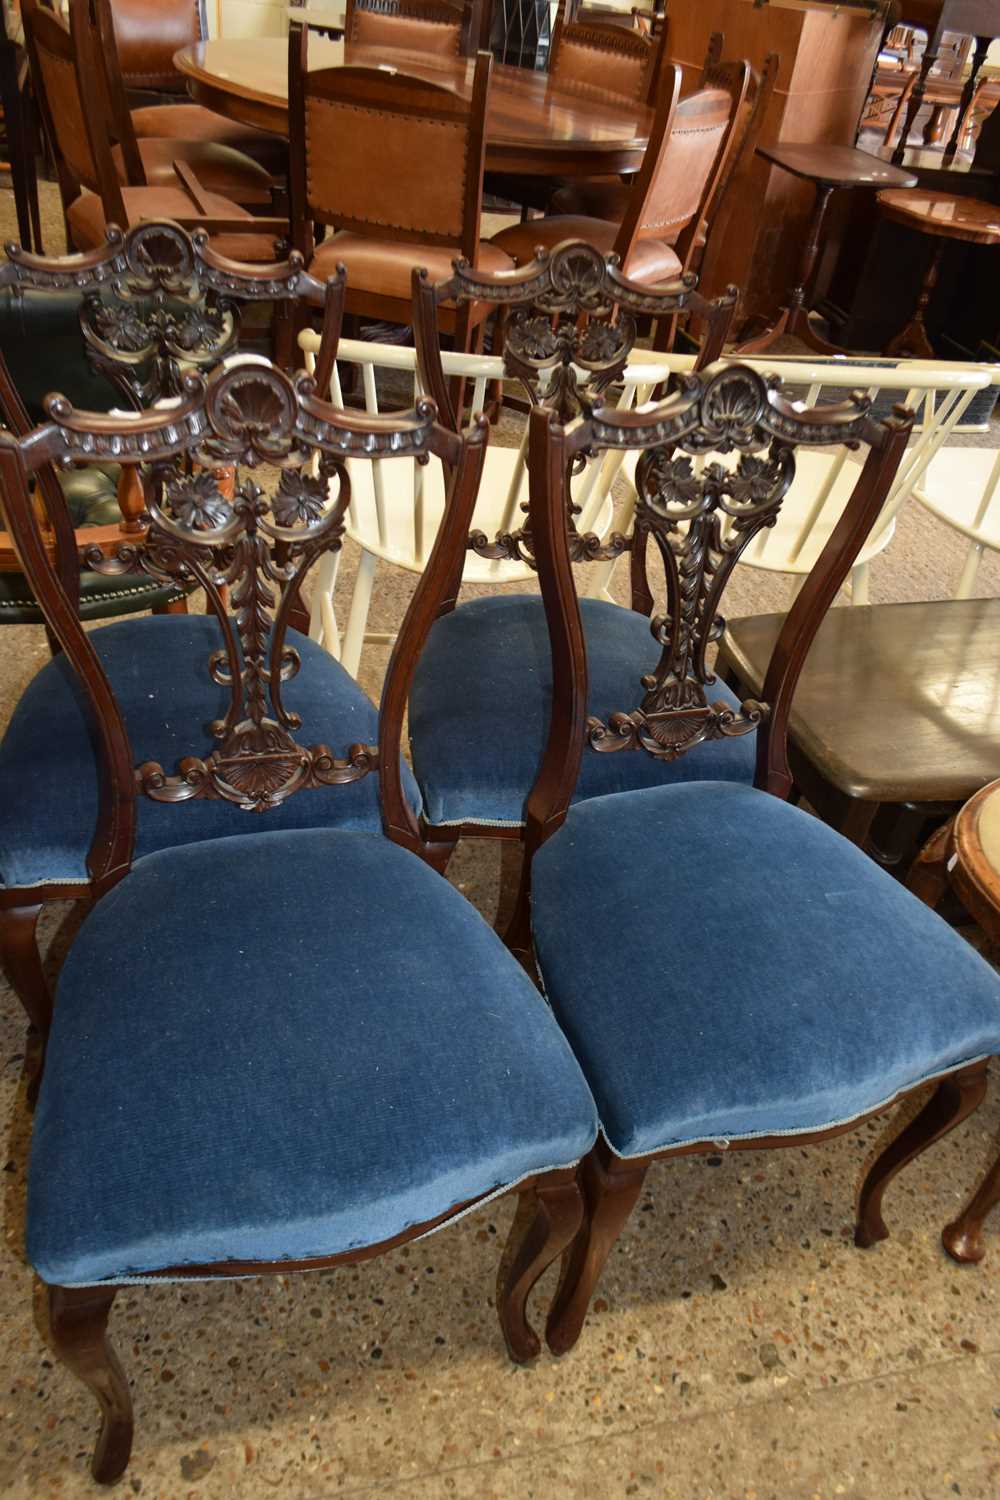 SET OF FOUR LATE 19TH/EARLY 20TH CENTURY MAHOGANY DINING CHAIRS WITH BLUE UPHOLSTERED SEATS